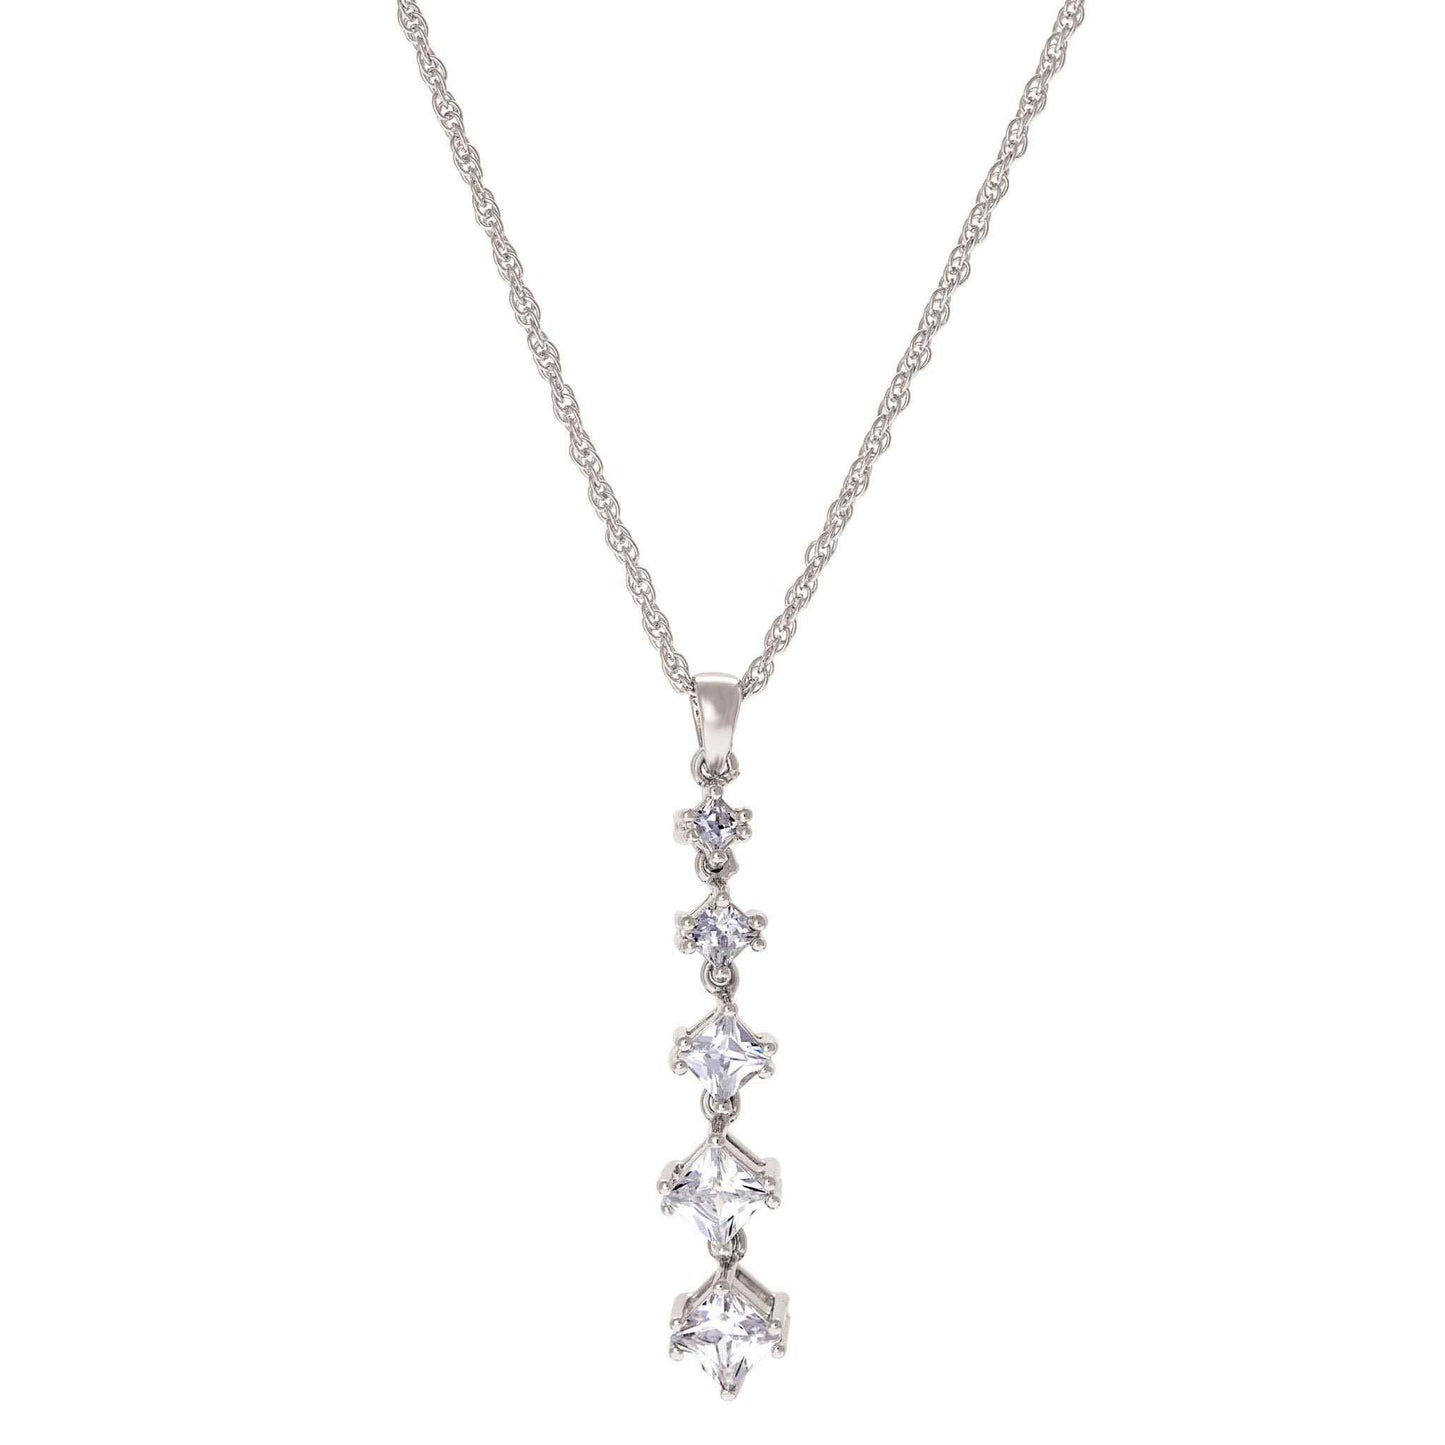 A princess cut simulated diamond journey necklace displayed on a neutral white background.